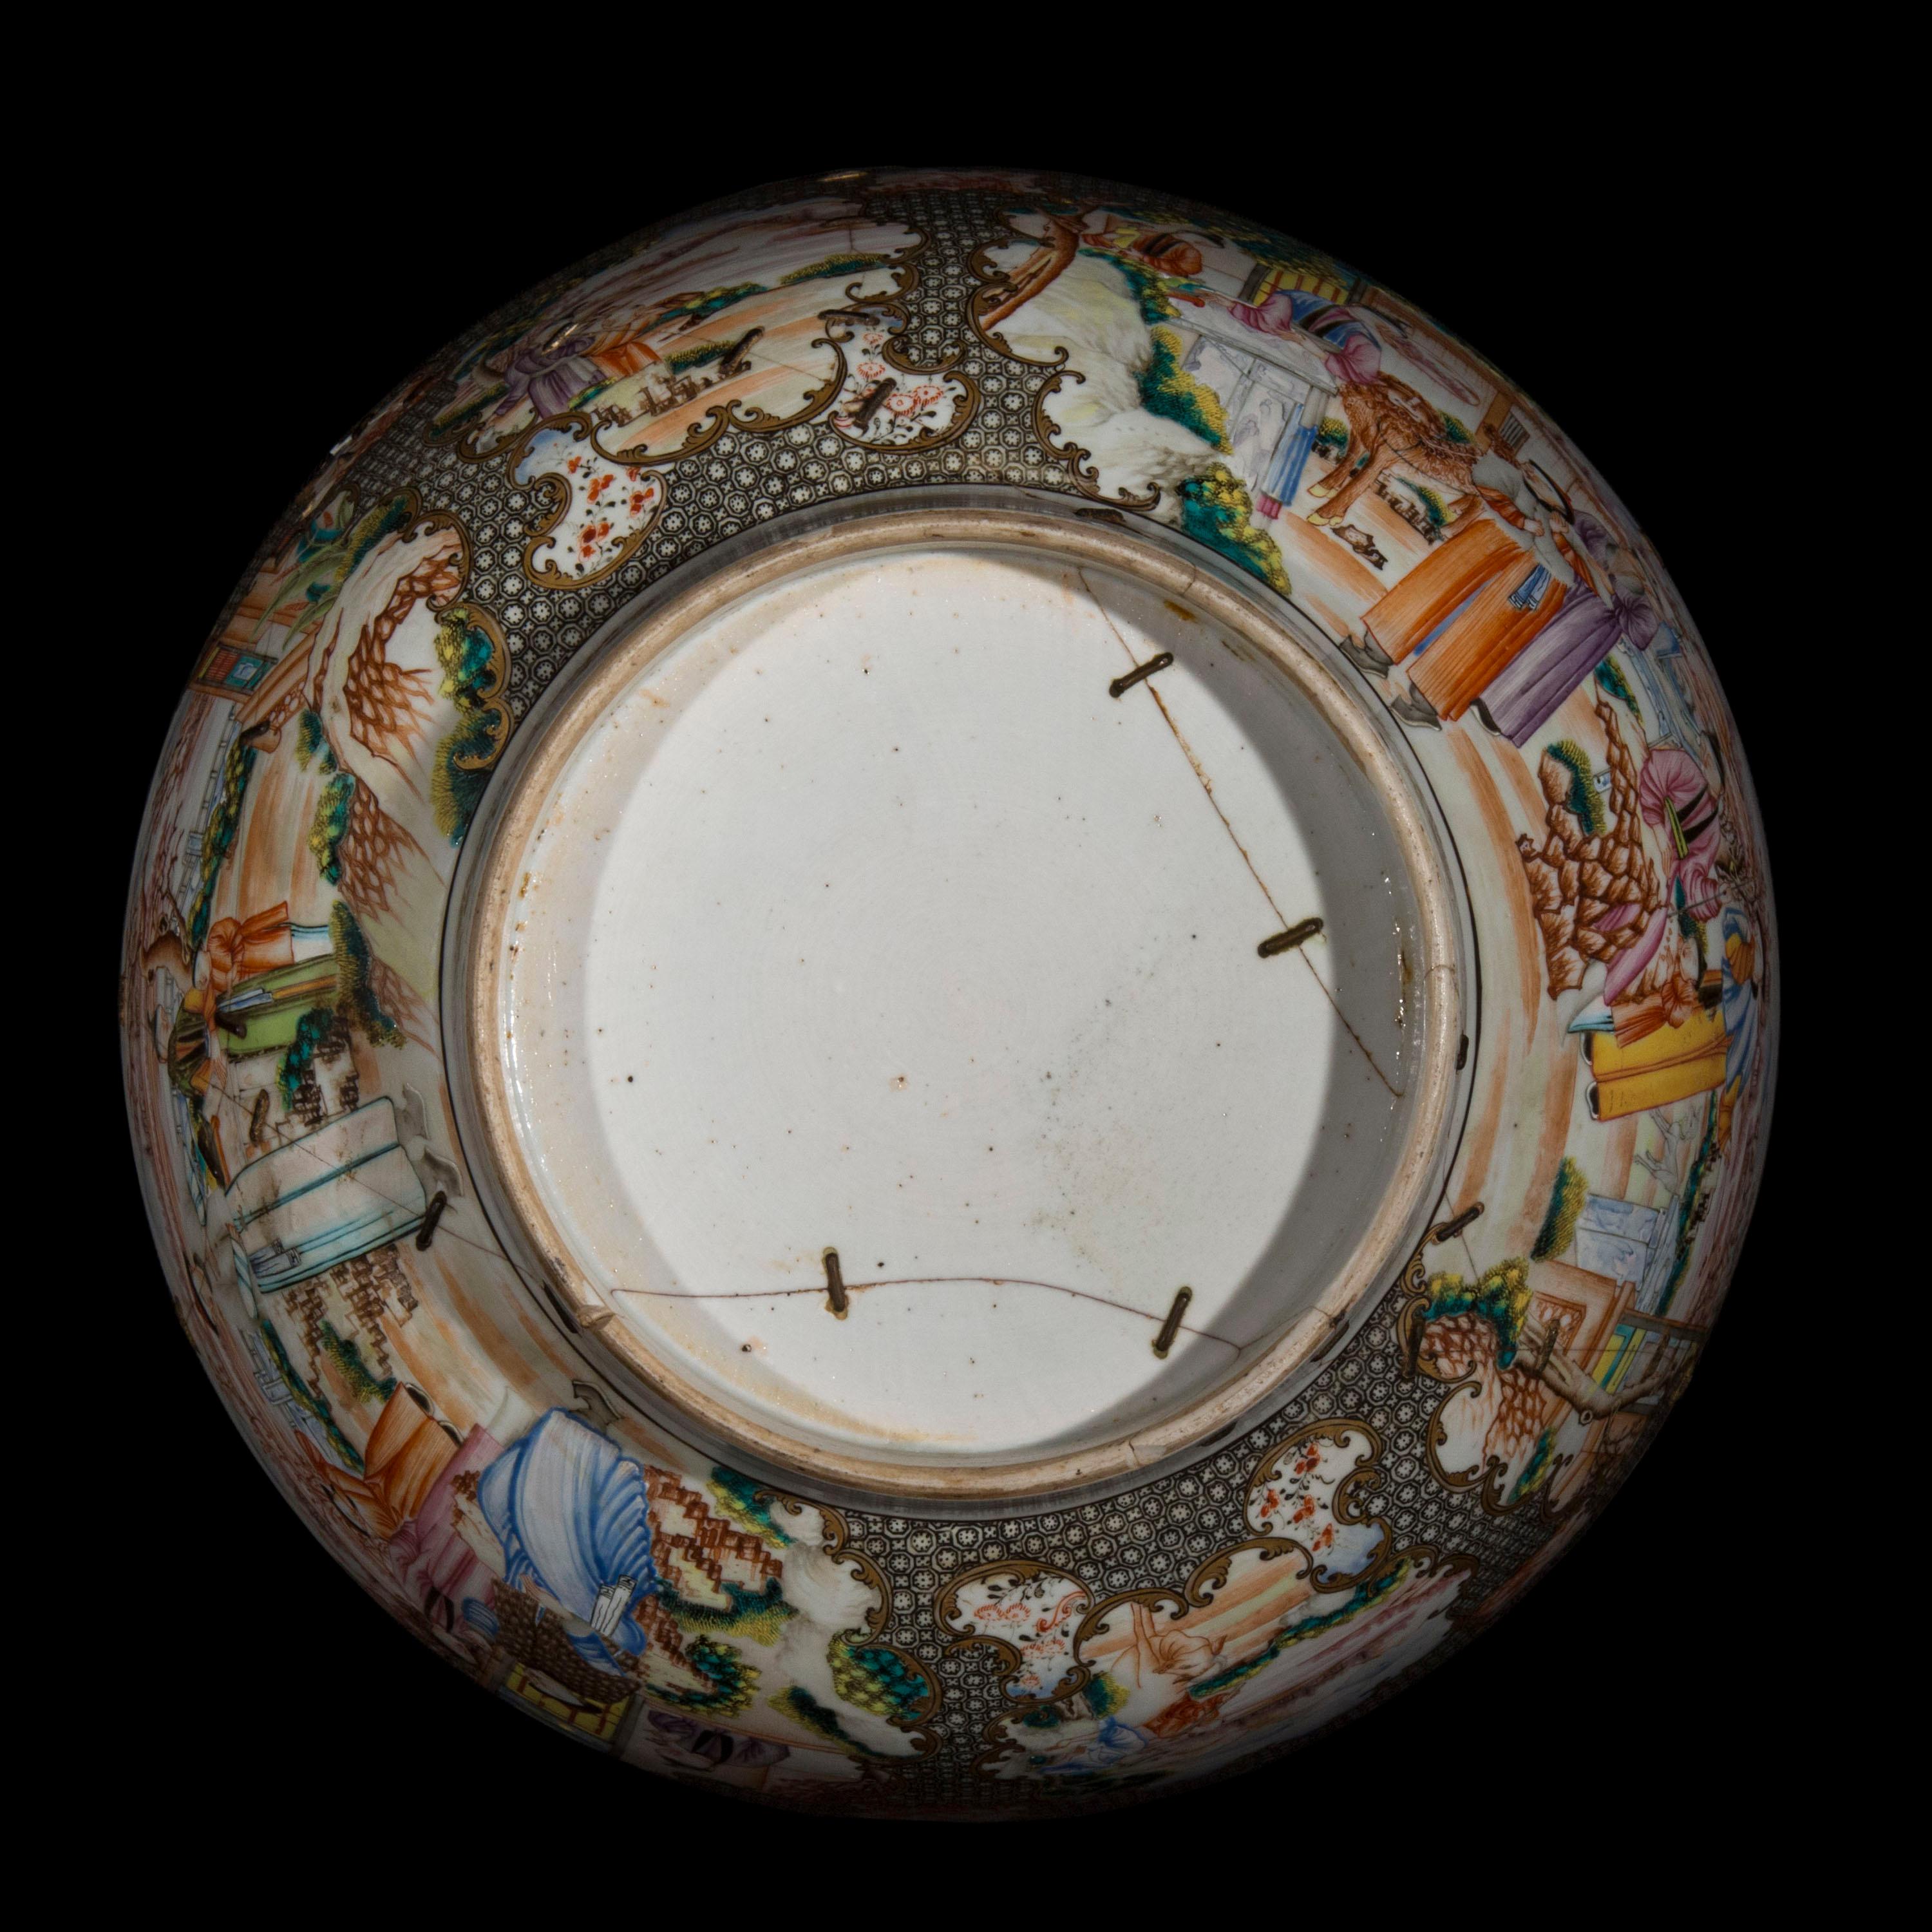 18th Century Chinese Export Porcelain Bowl with Old Riveted Repairs 8